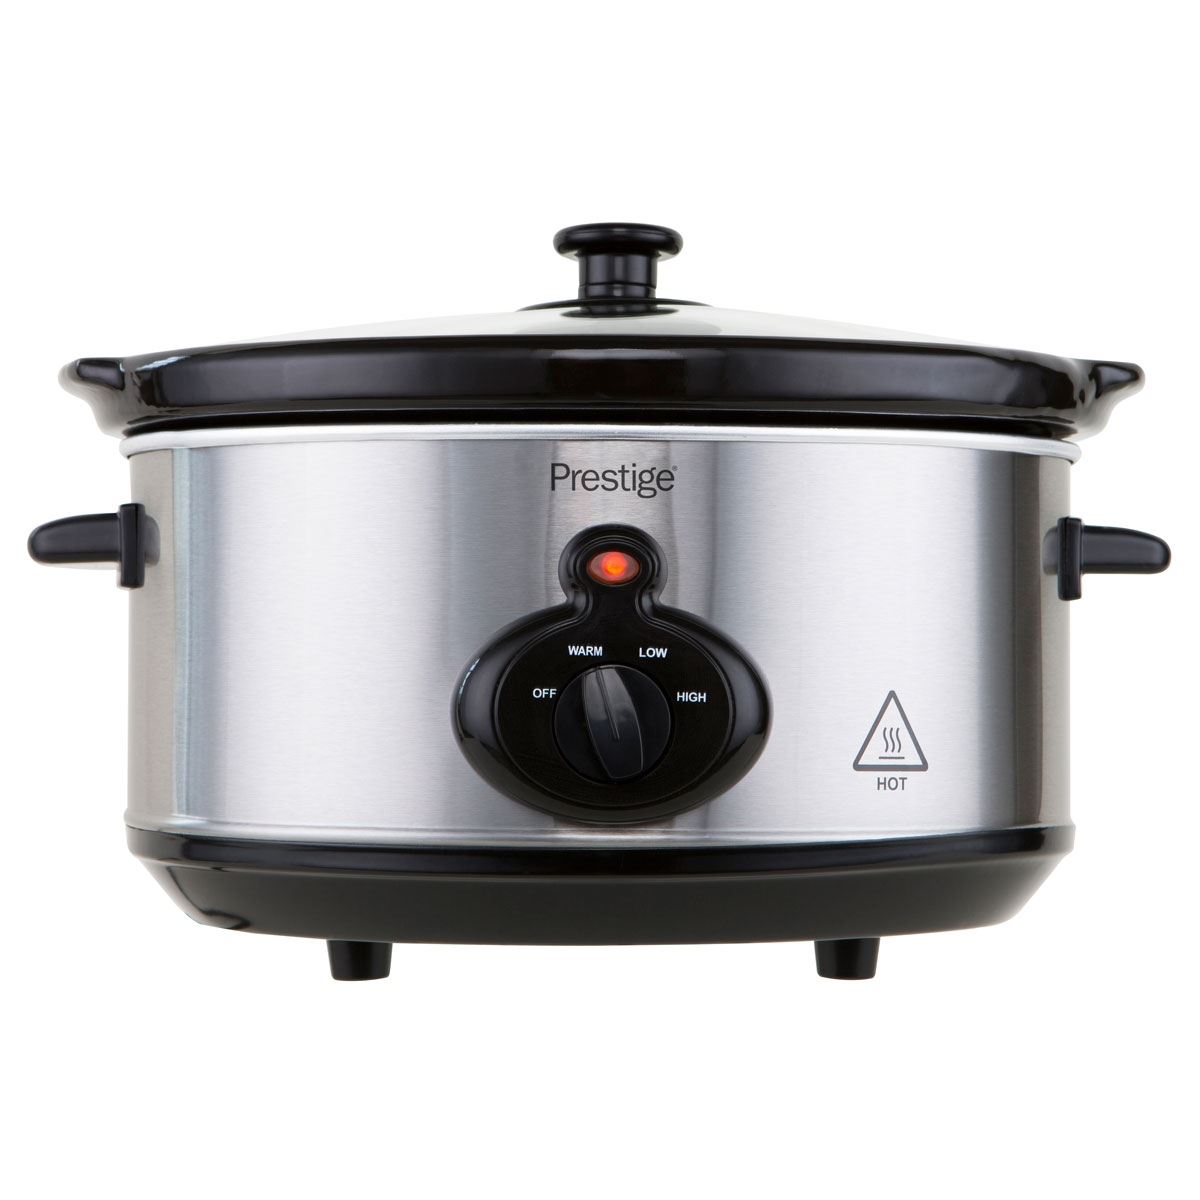 Prestige Mechanical Slow Cooker Questions & Answers